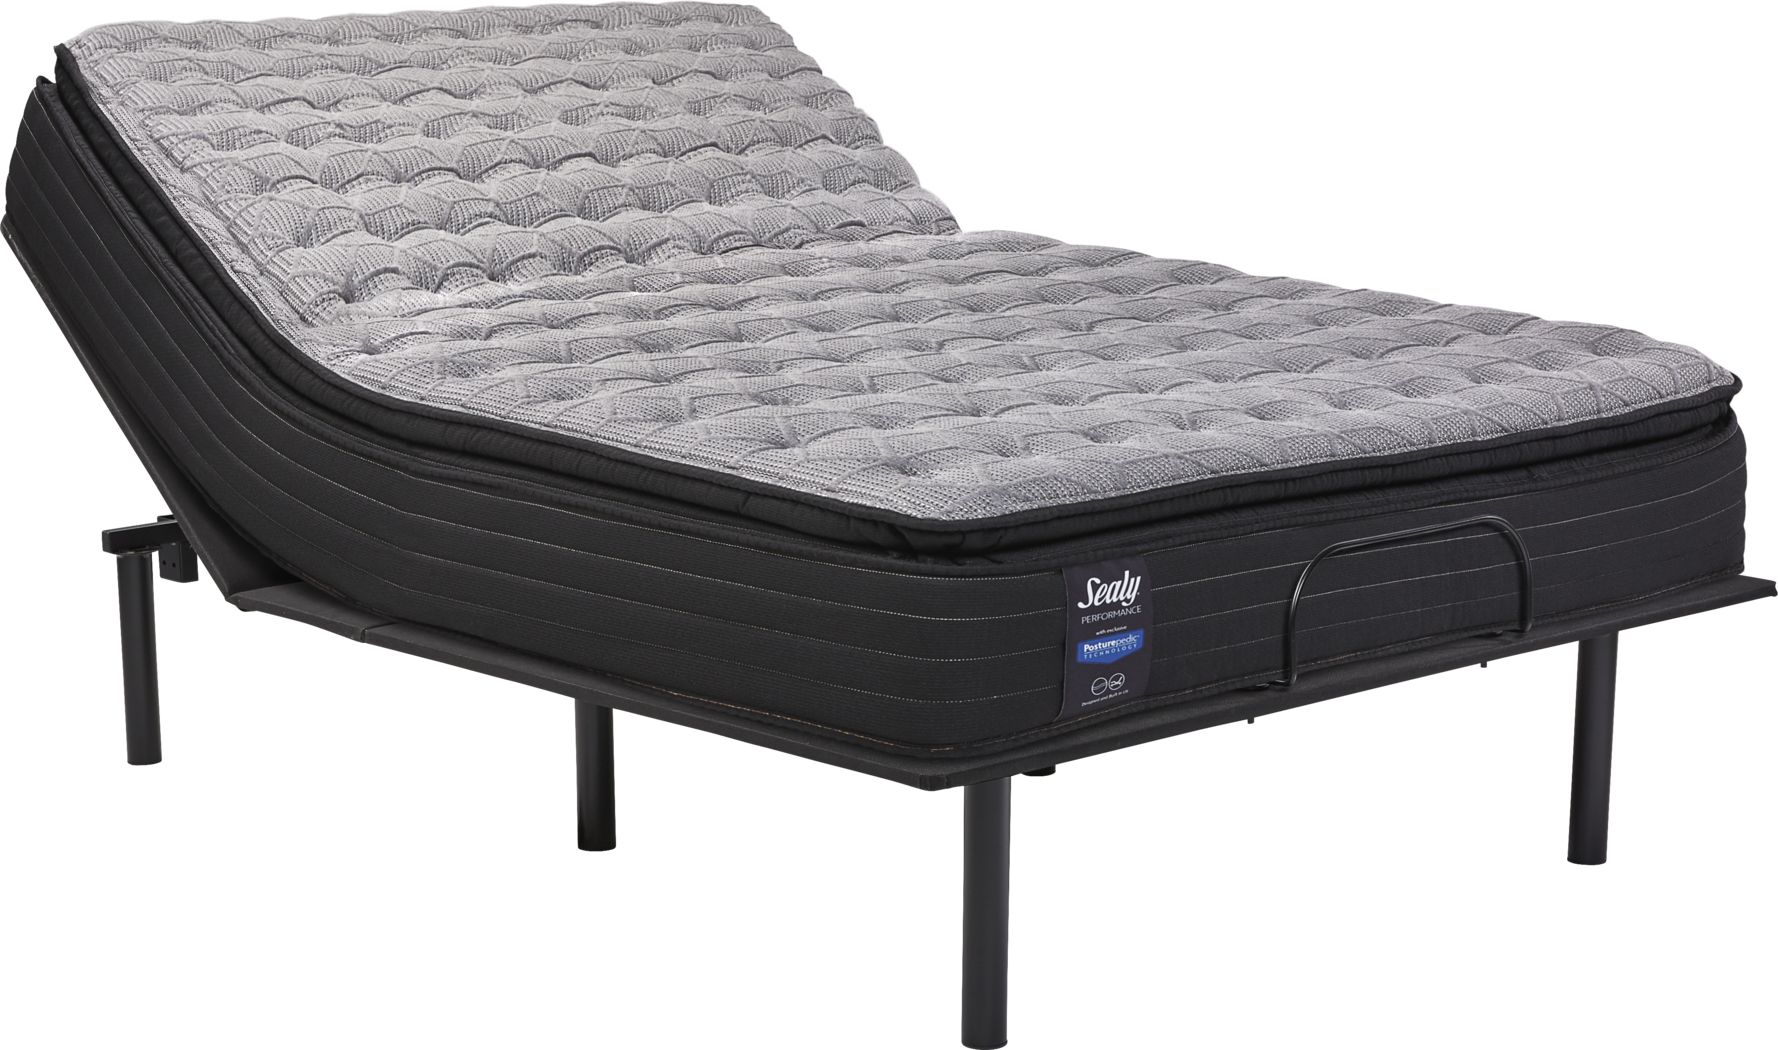 sealy mattress for adjustable base